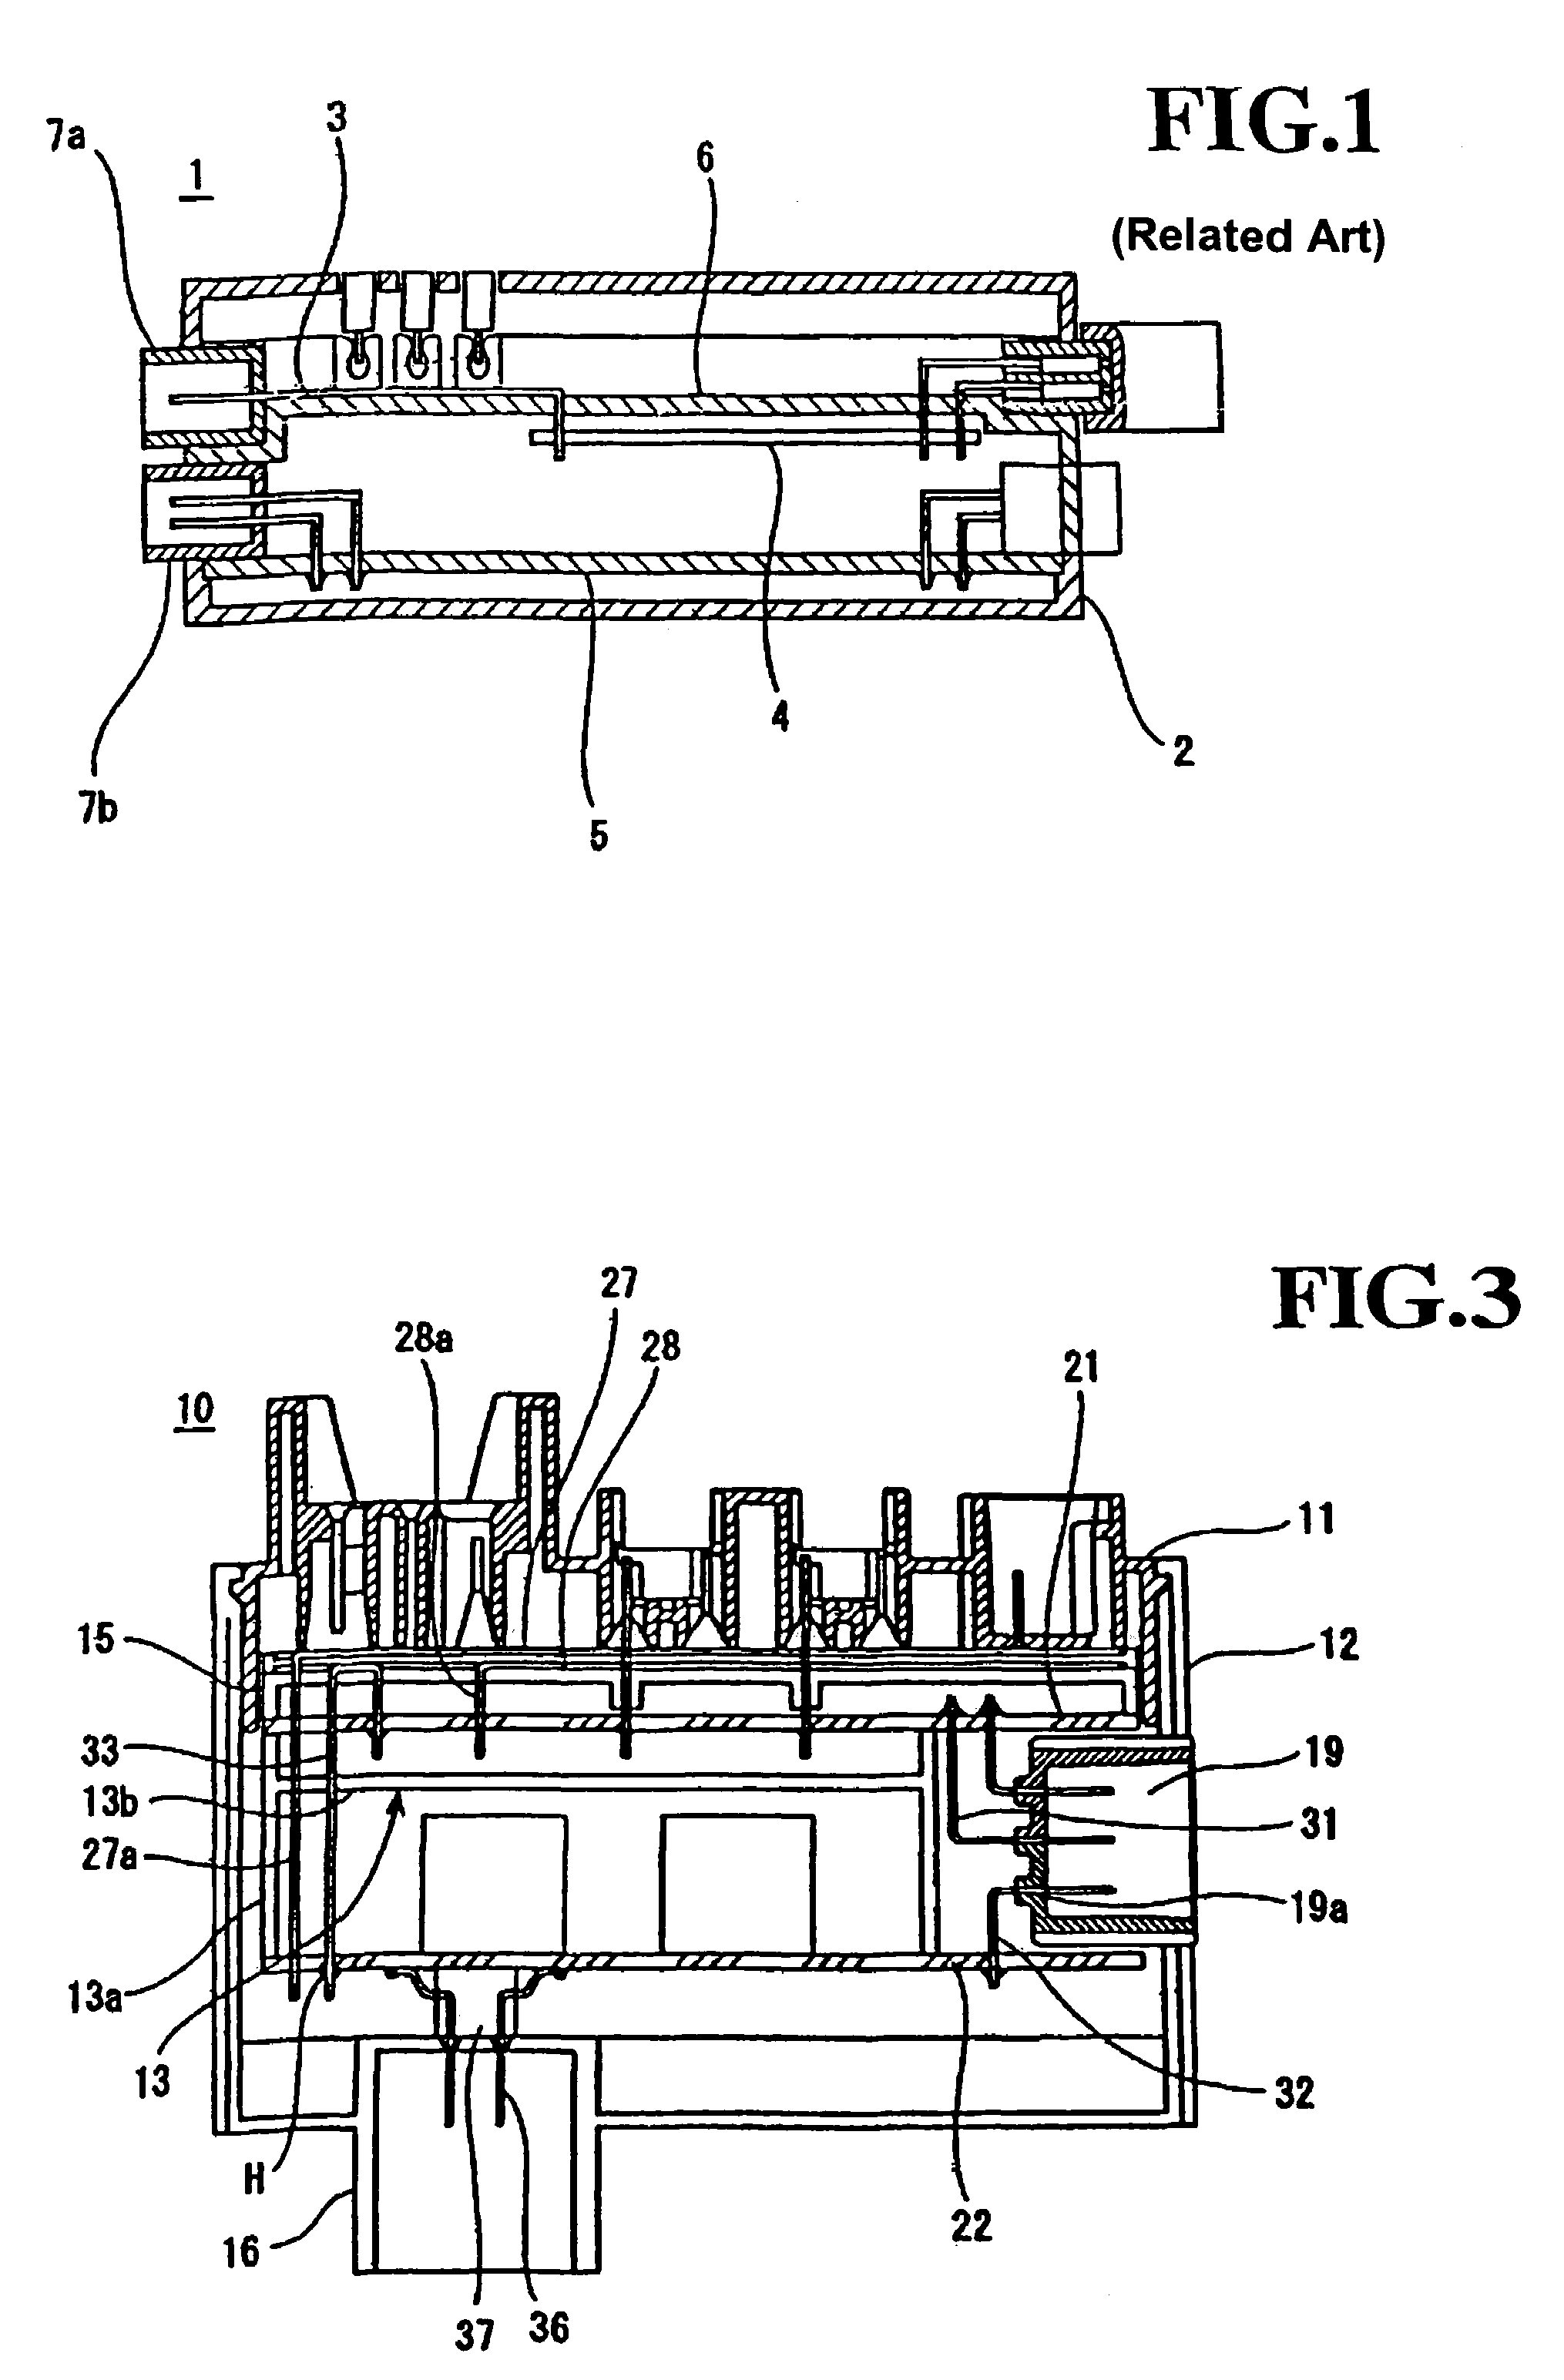 Electrical connector housing having a bridging piece between circuit boards connected to a receiving unit